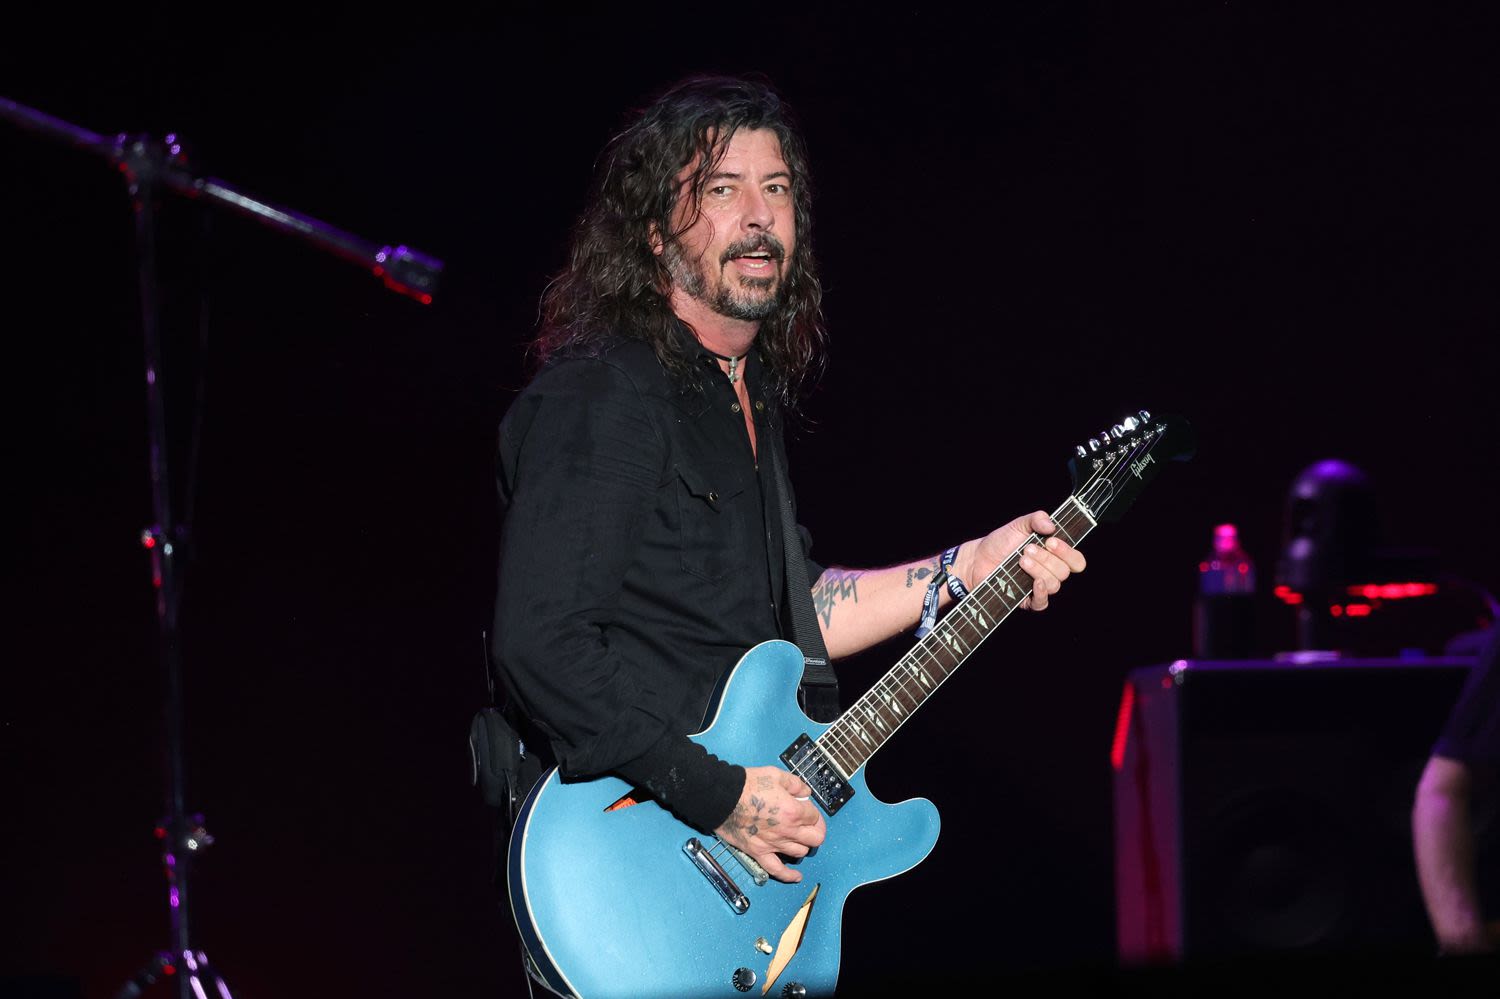 Dave Grohl Dedicates Foo Fighters' 'My Hero' Hit to Late Steve Albini: 'He Left Us Much Too Soon'